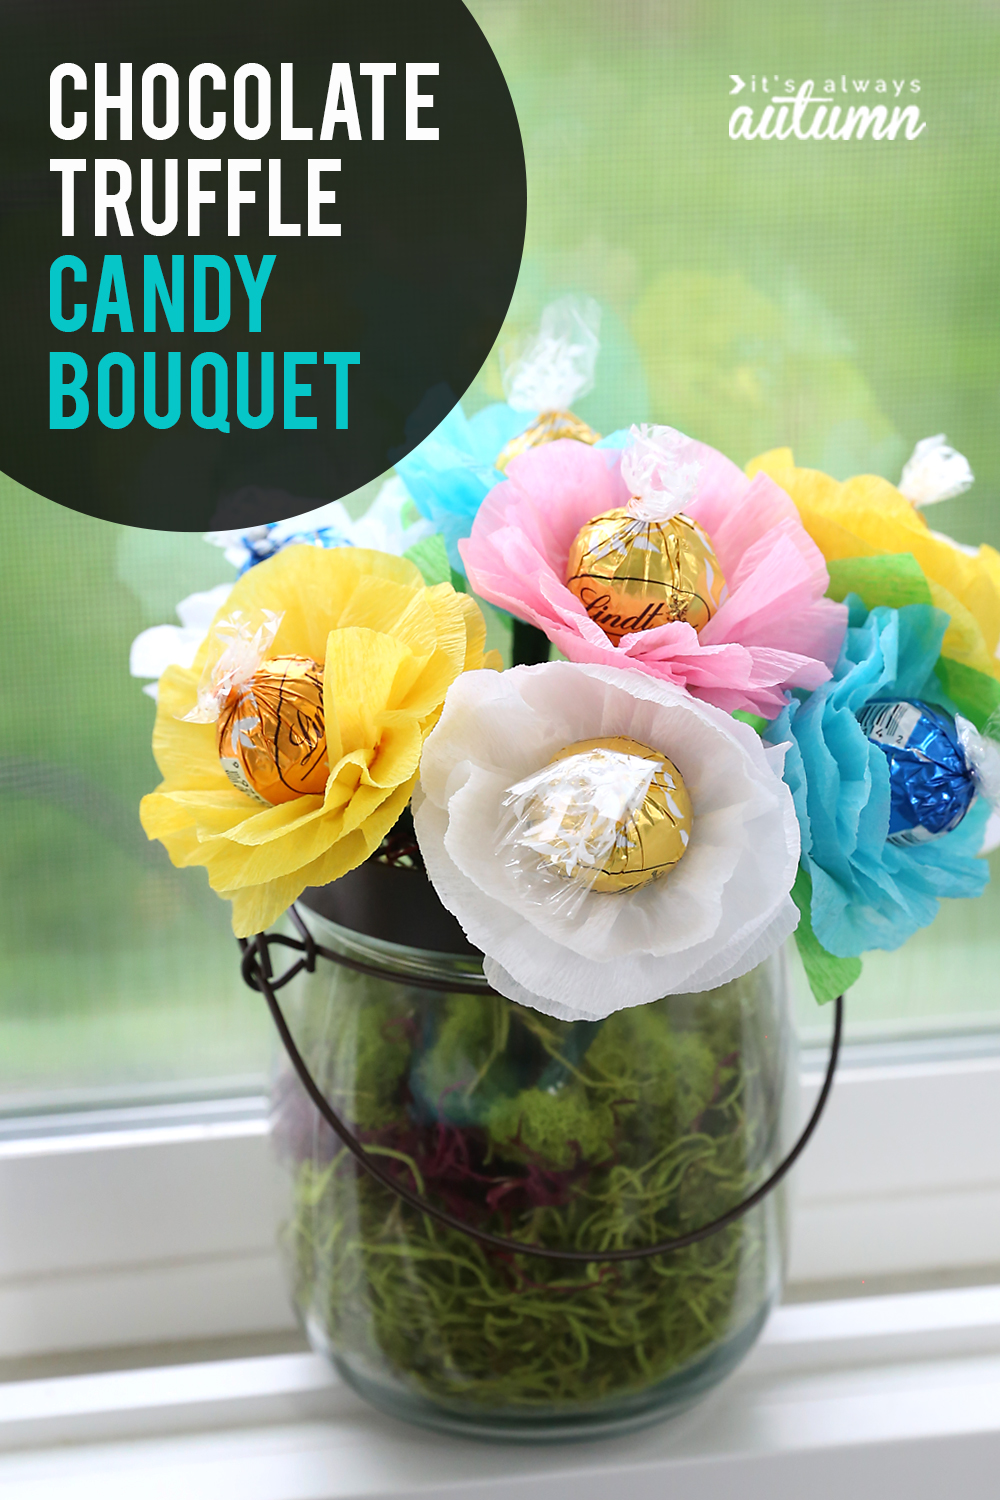 A vase with flowers made from chocolate truffles and paper